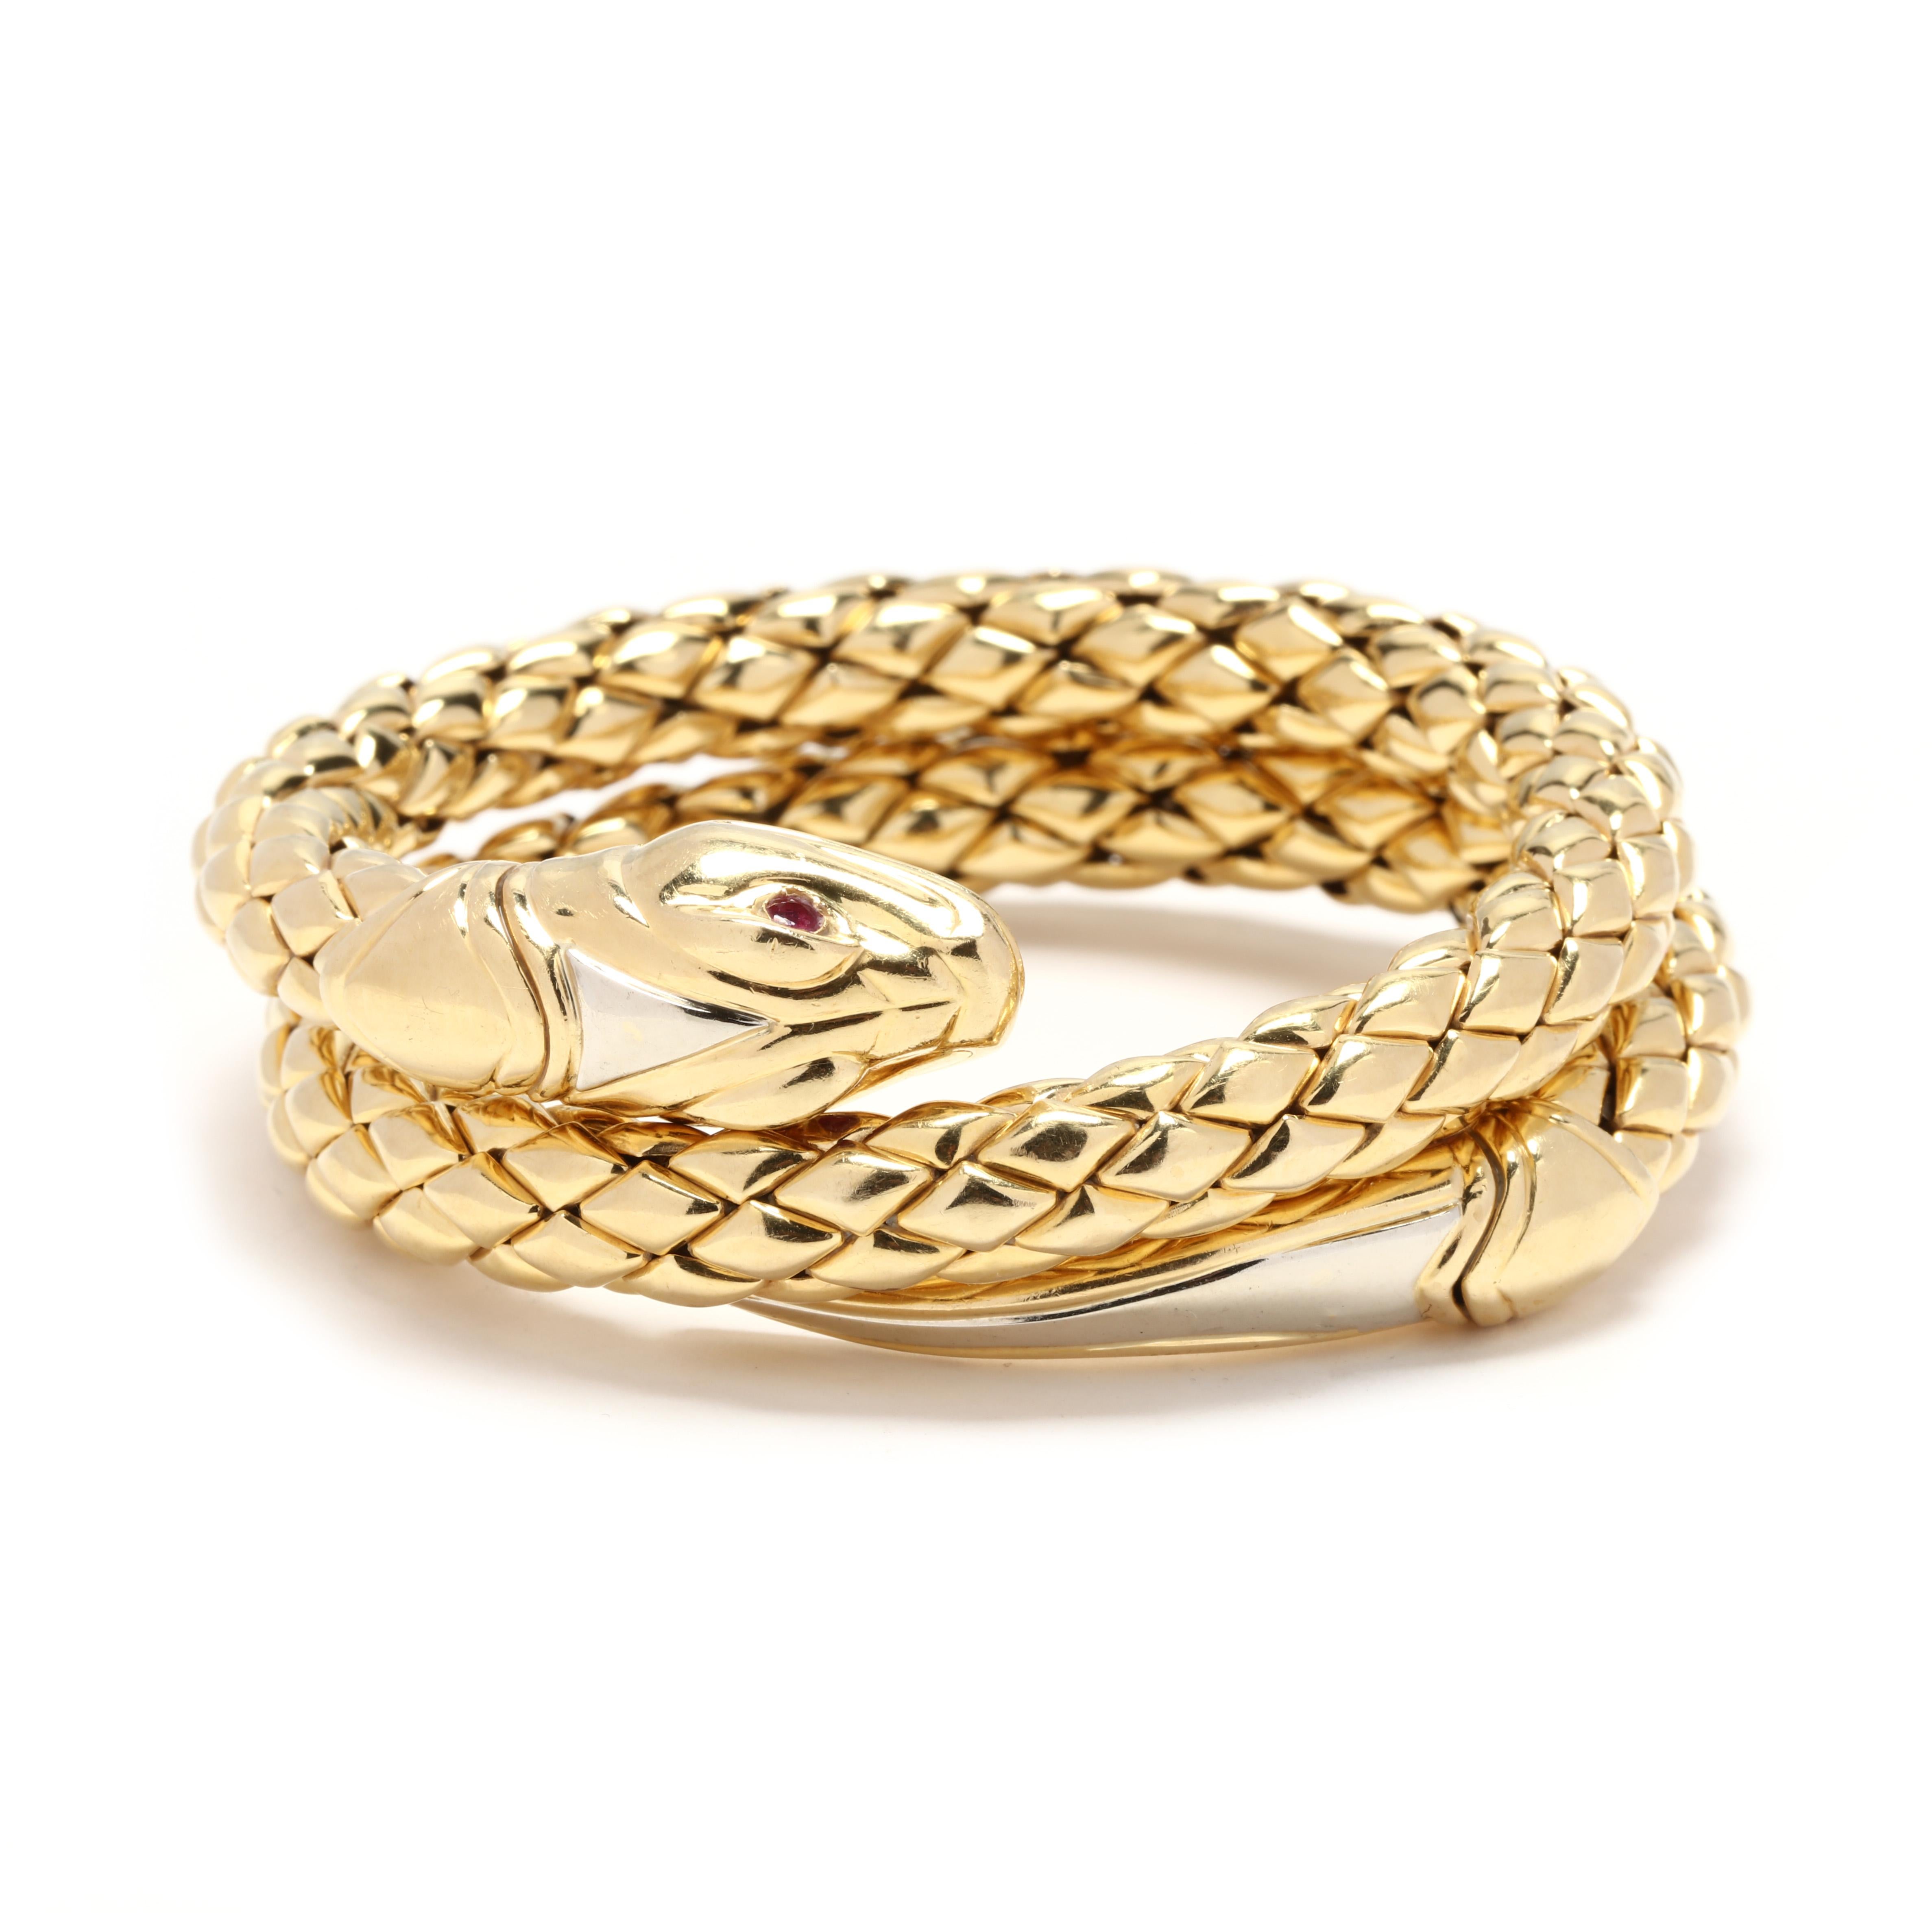 An 18 karat yellow gold and ruby double coil snake bracelet by Chimento. This double wrap bracelet is made of solid gold, that is flexible so that it wraps around your wrist. With a snake hear motif at one end with round cut ruby eyes, a lozenge